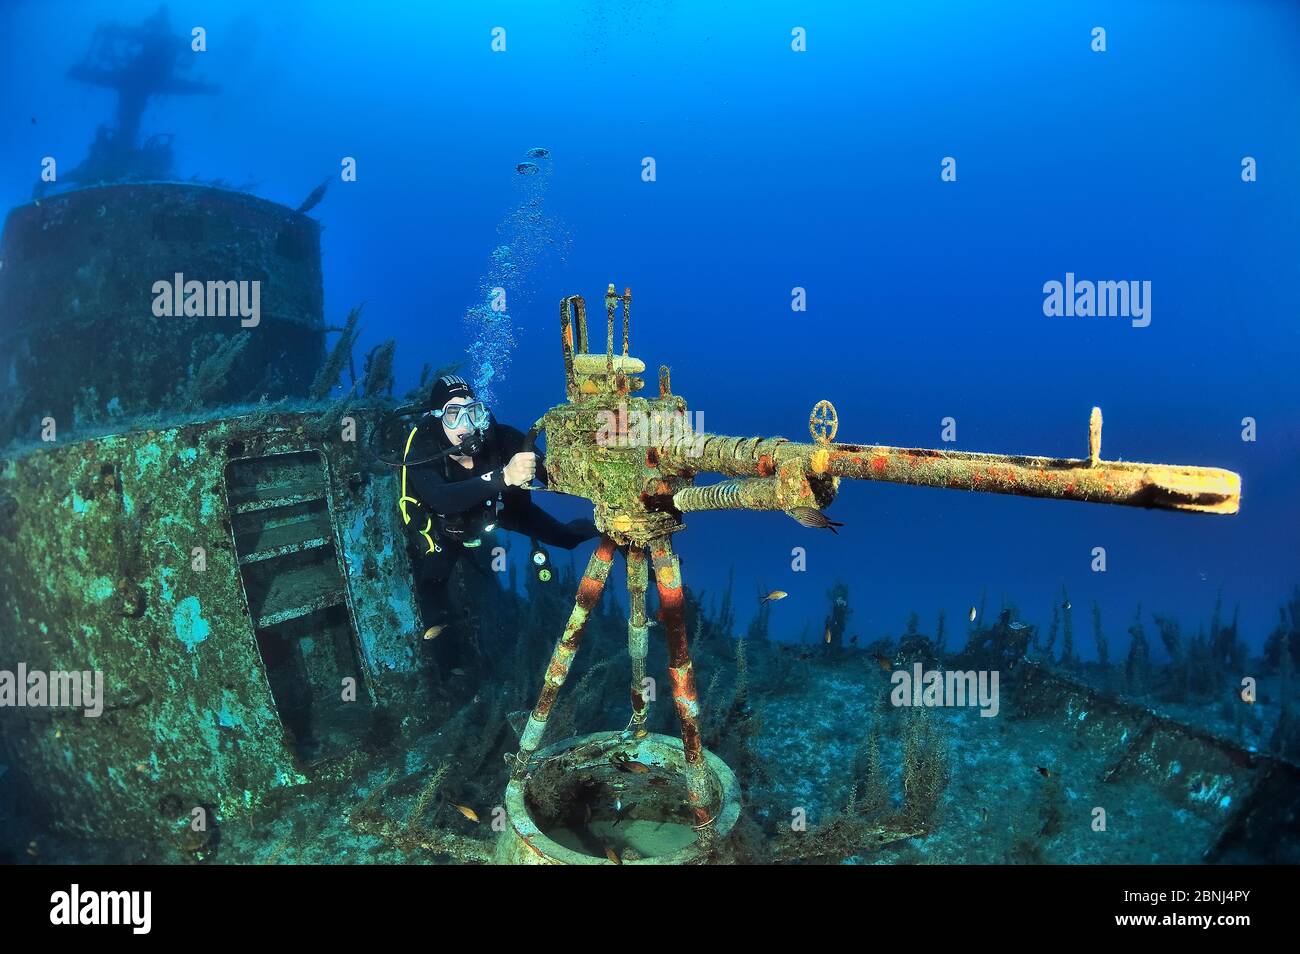 A diver near the machine gun on the deck of the wreck of the P 29 a patrol boat scuttled as an artificial dive site in August 2007, Malta, Mediterrane Stock Photo